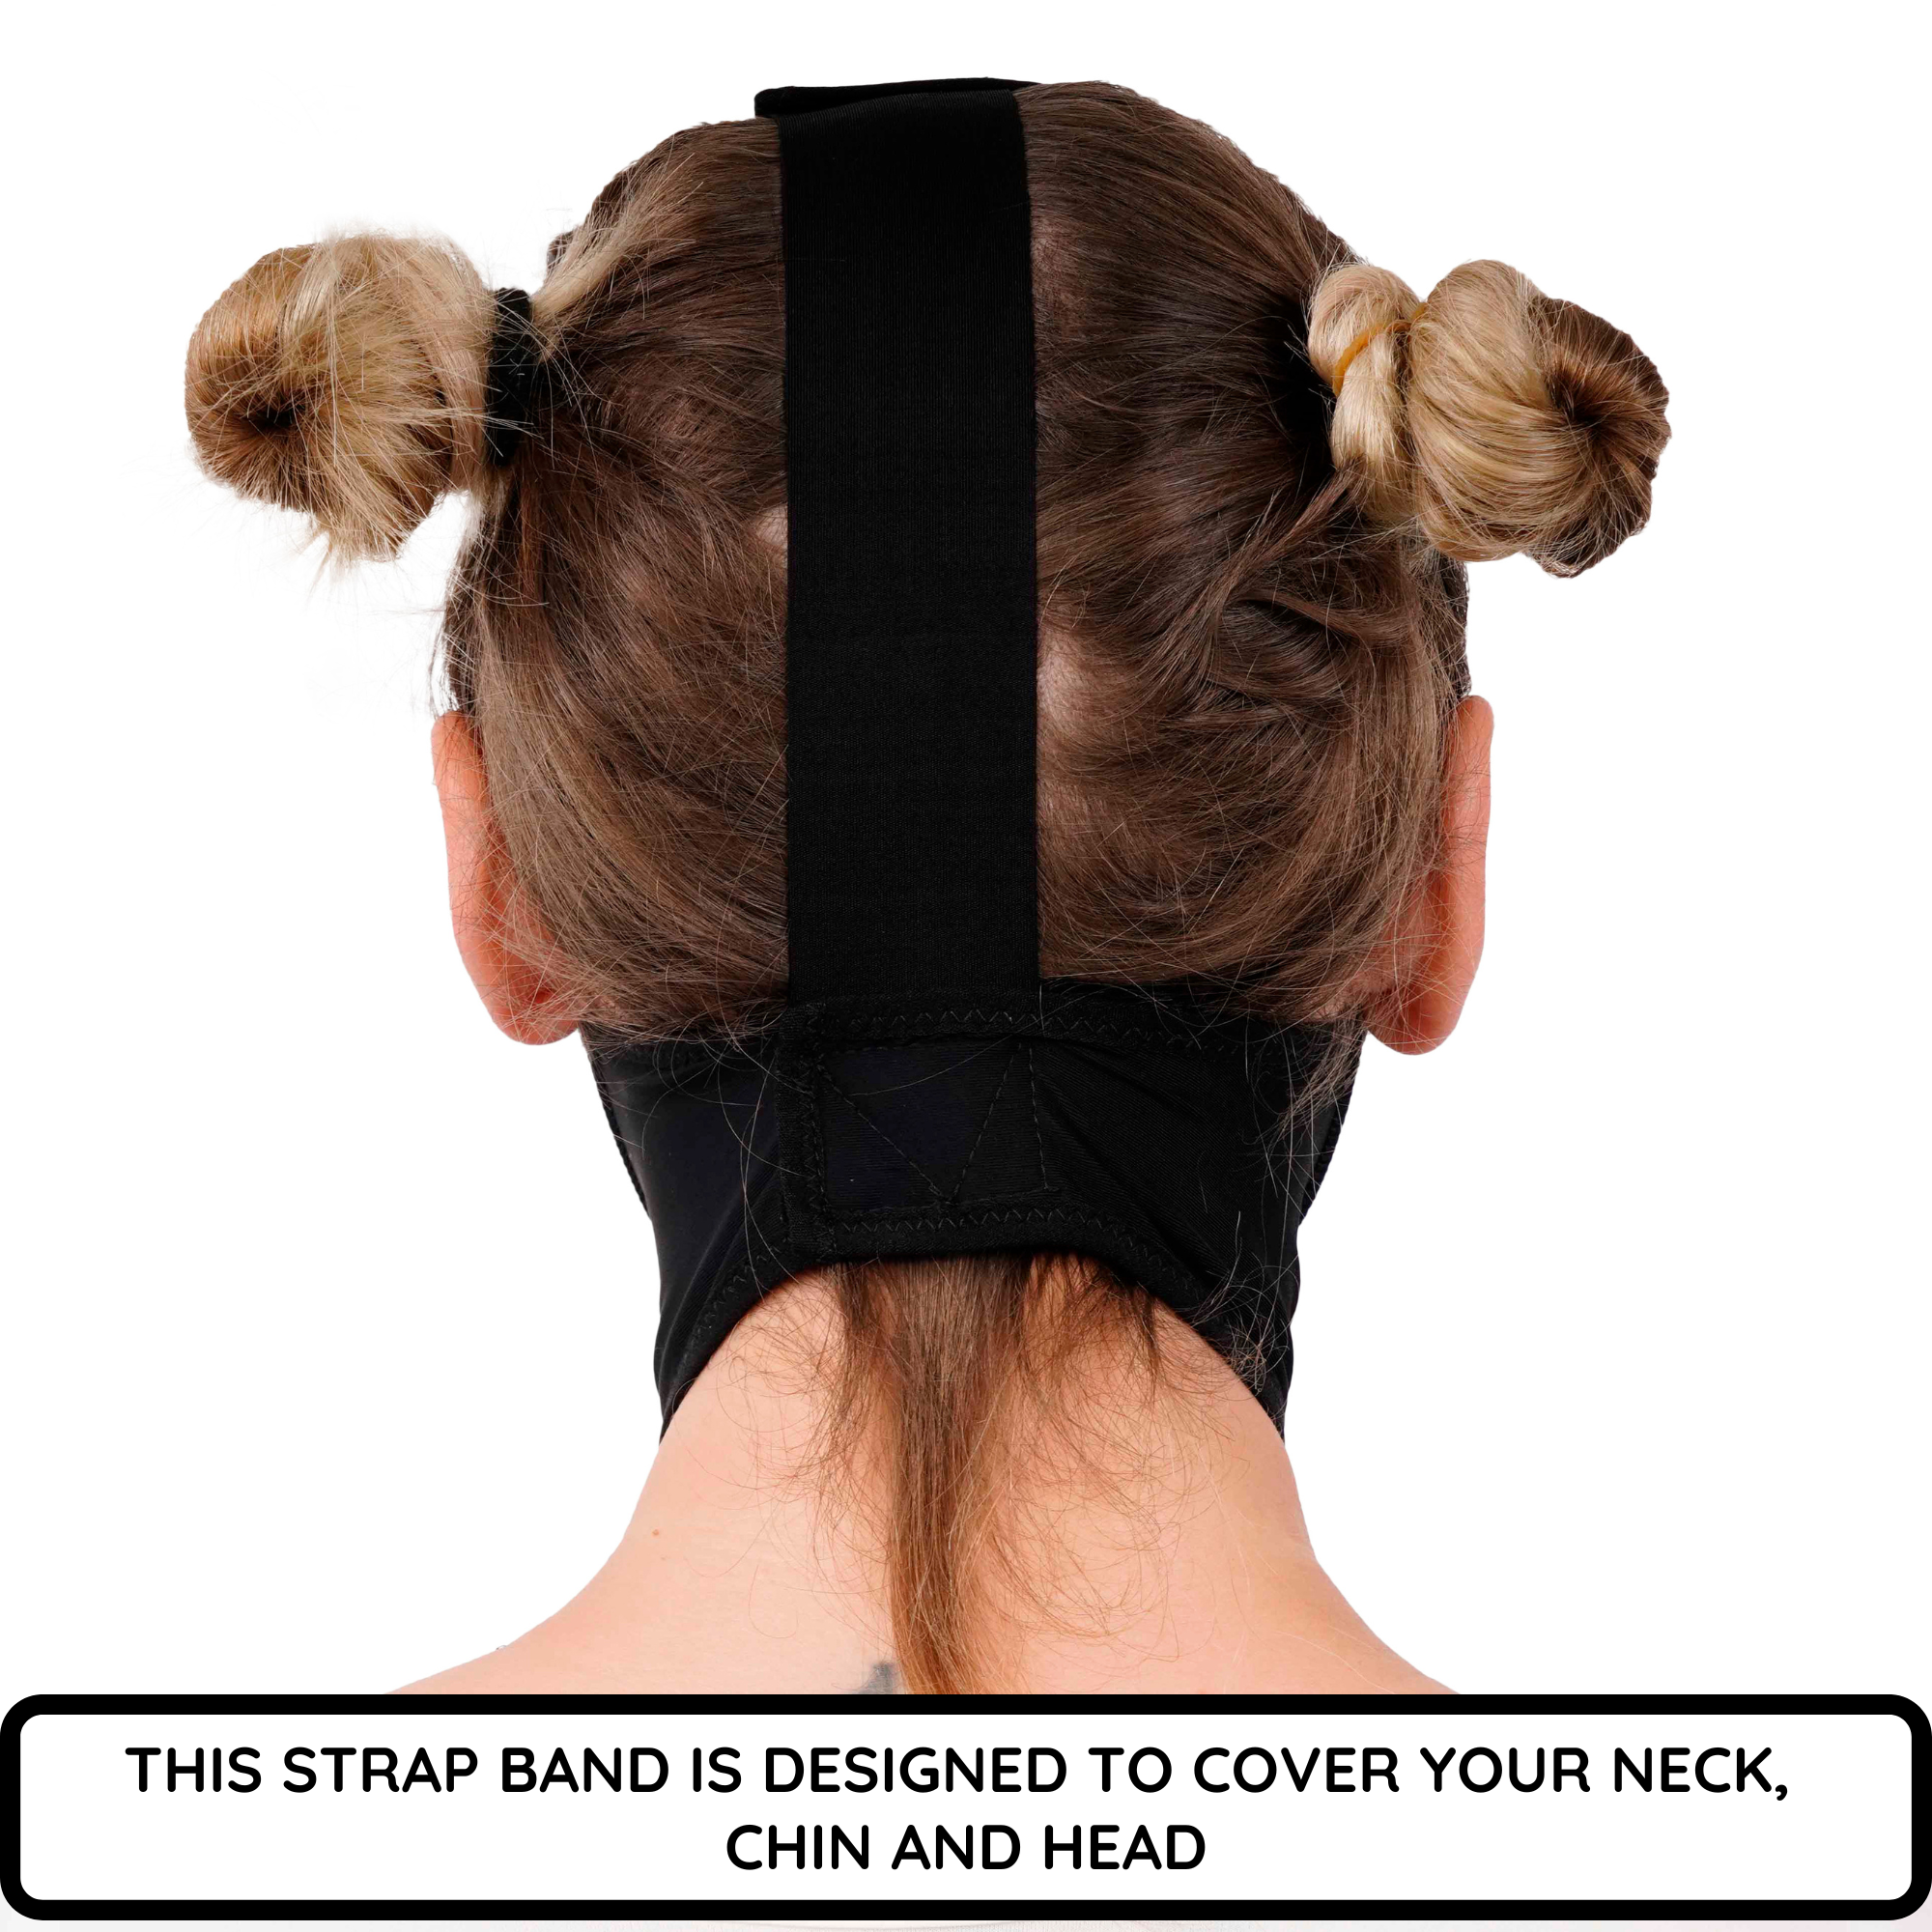 Chin Compression Garment After Liposuction Surgery, Neck Cover Strap Bandage